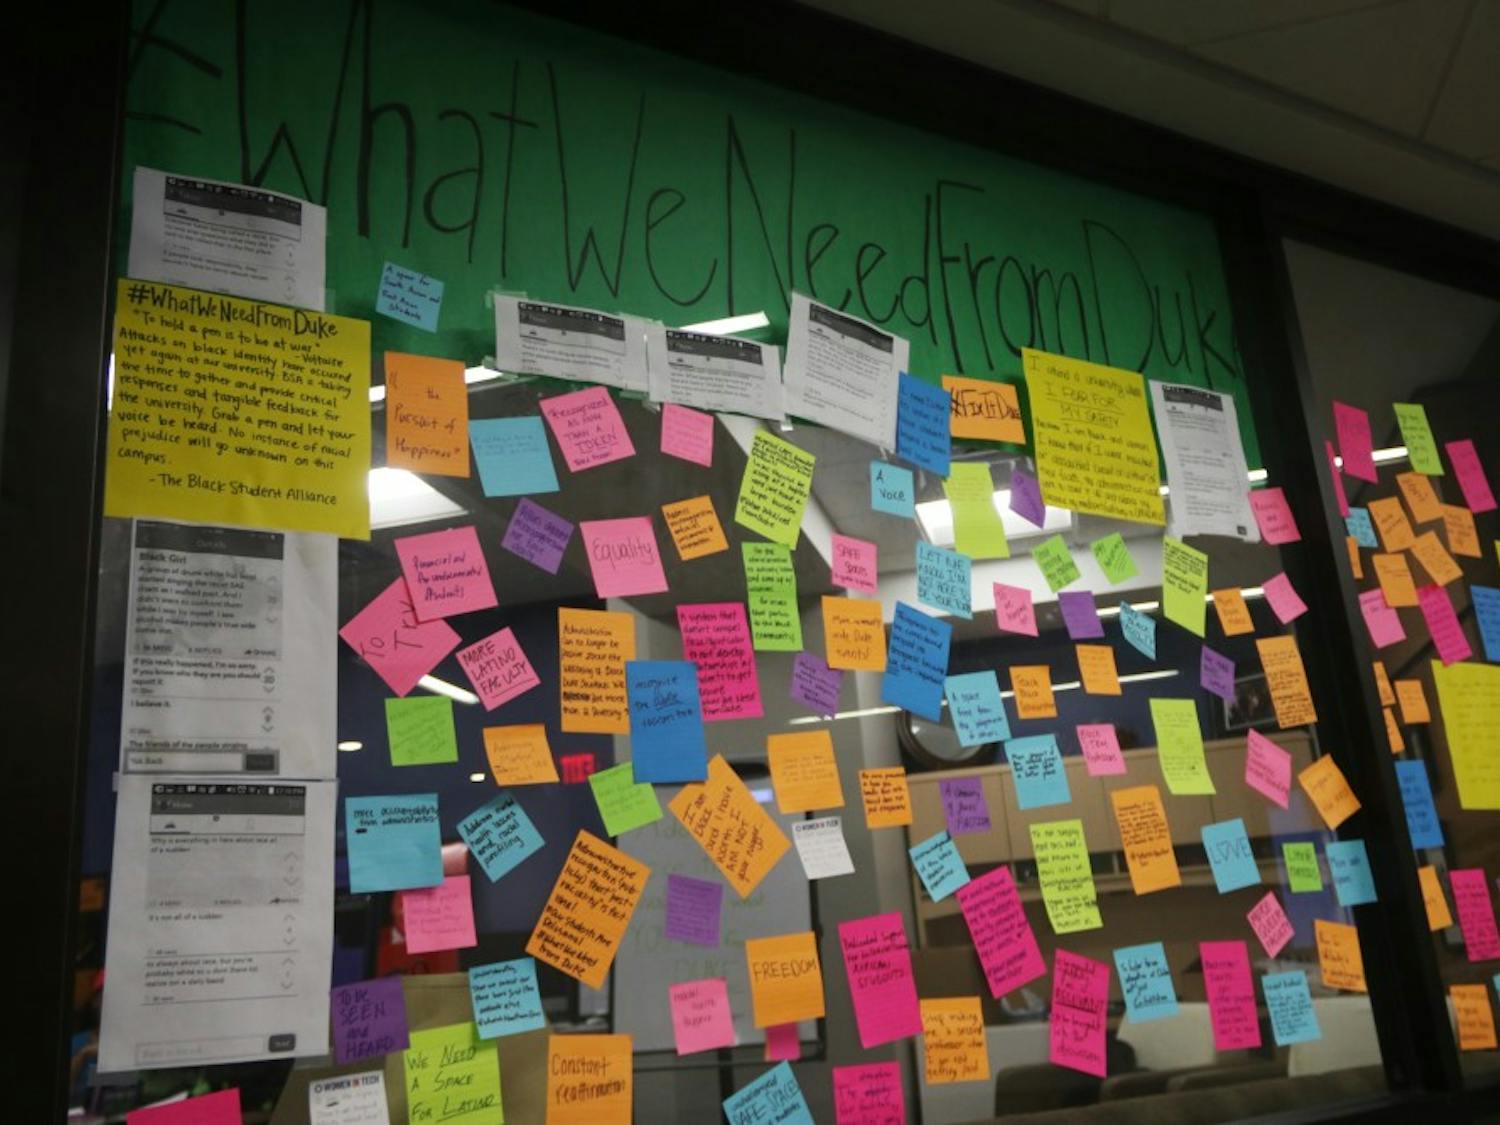 The #WhatWeNeedFromDuke campaign, which aims to provide an outlet for students of color and other groups to express their fears, concerns and needs, has elicited more than 80 physical submissions through post-it notes on the glass wall of the Black Student Alliance office.